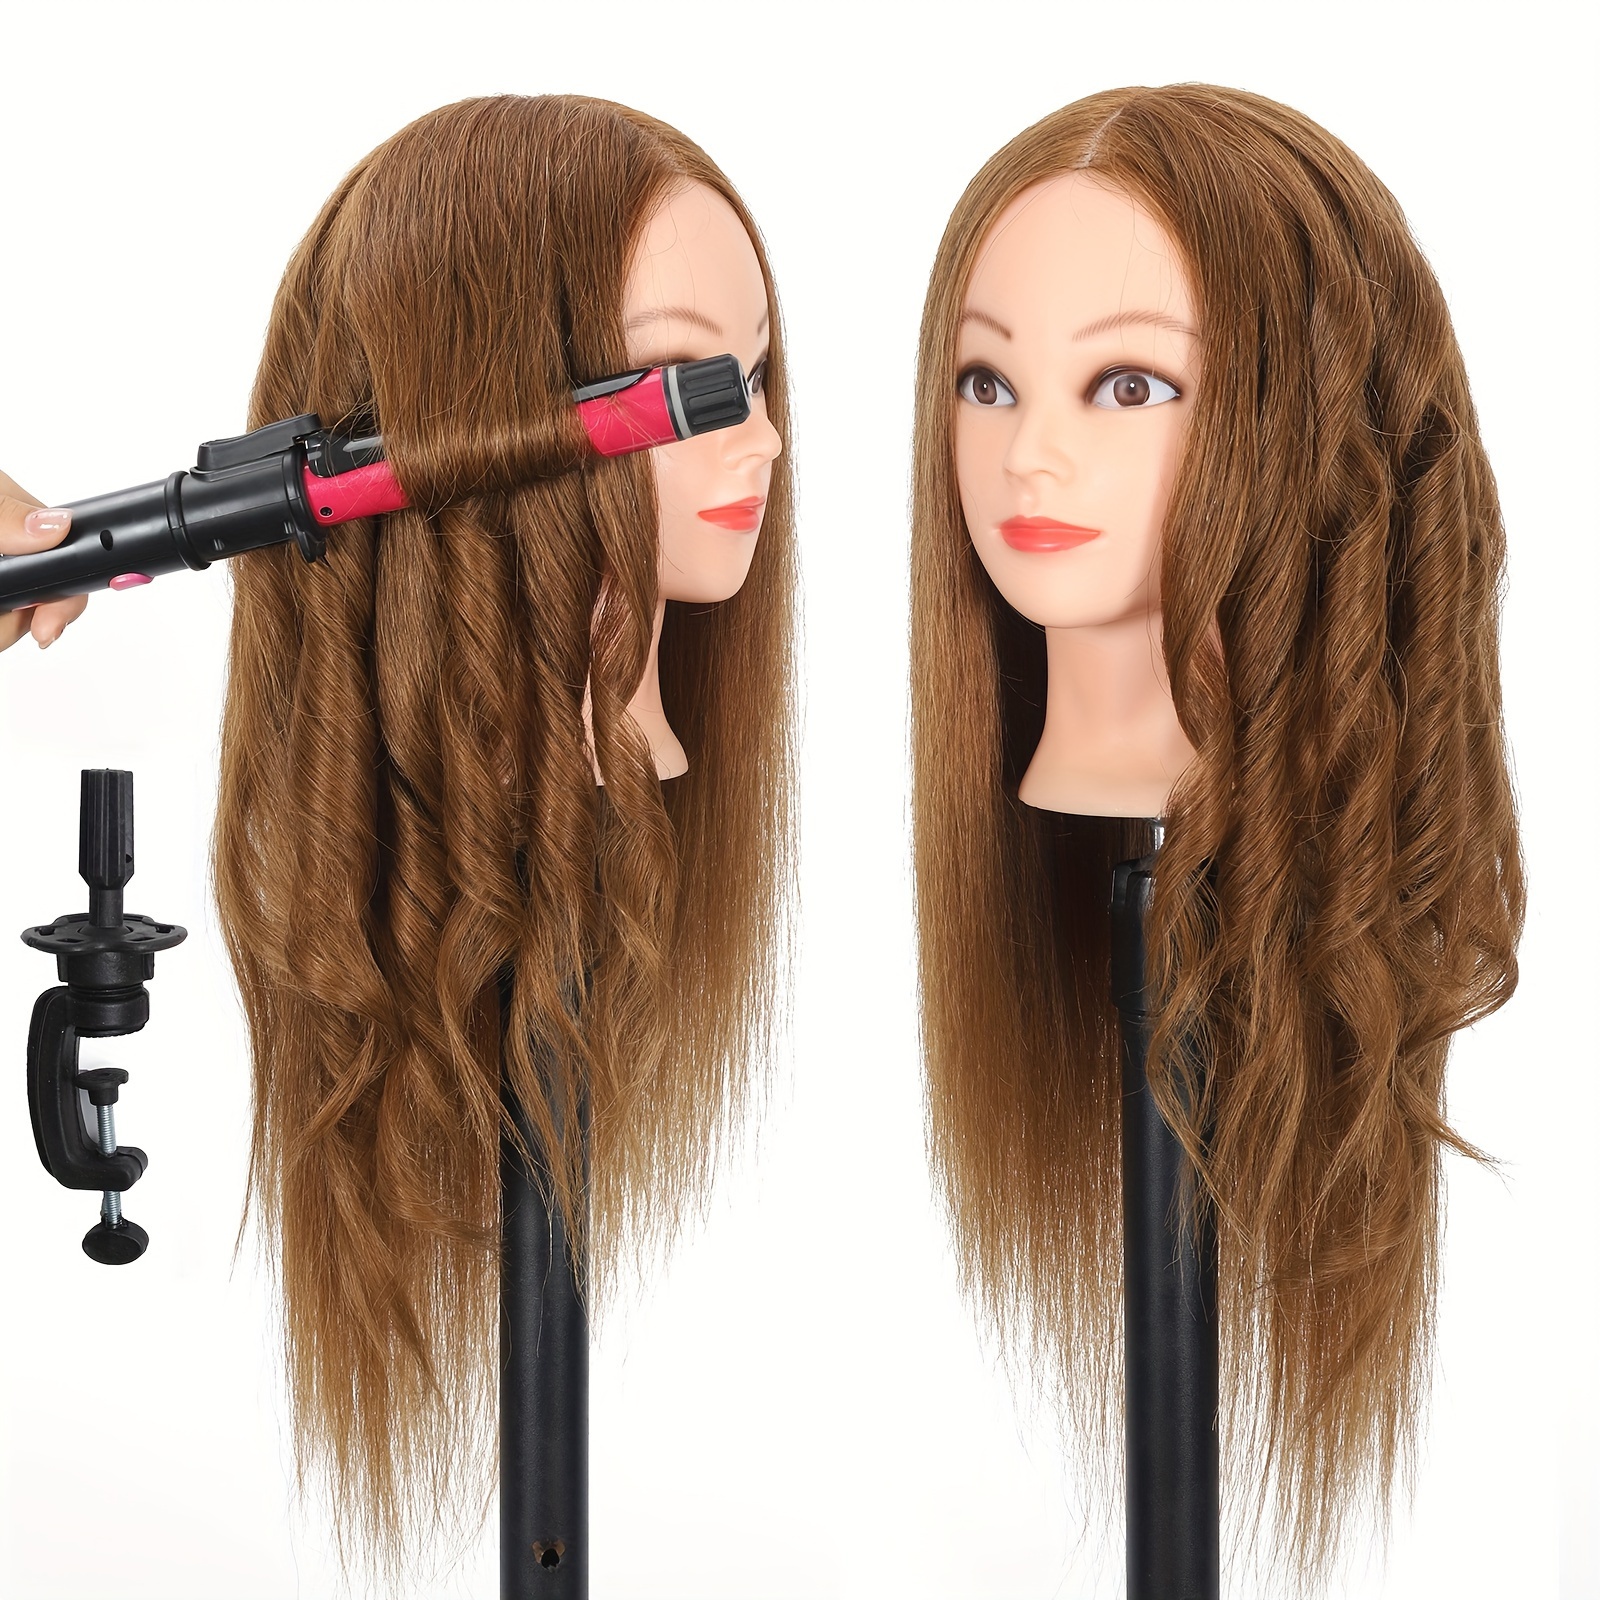  FABA 100% Real Hair Mannequin Head with Hair Doll Head for  Hair Styling 20-22 Cosmetology Doll Head Manikin Practice Head  Hairdresser Doll Head for Dyeing Cutting Braiding with Clamp Stand 